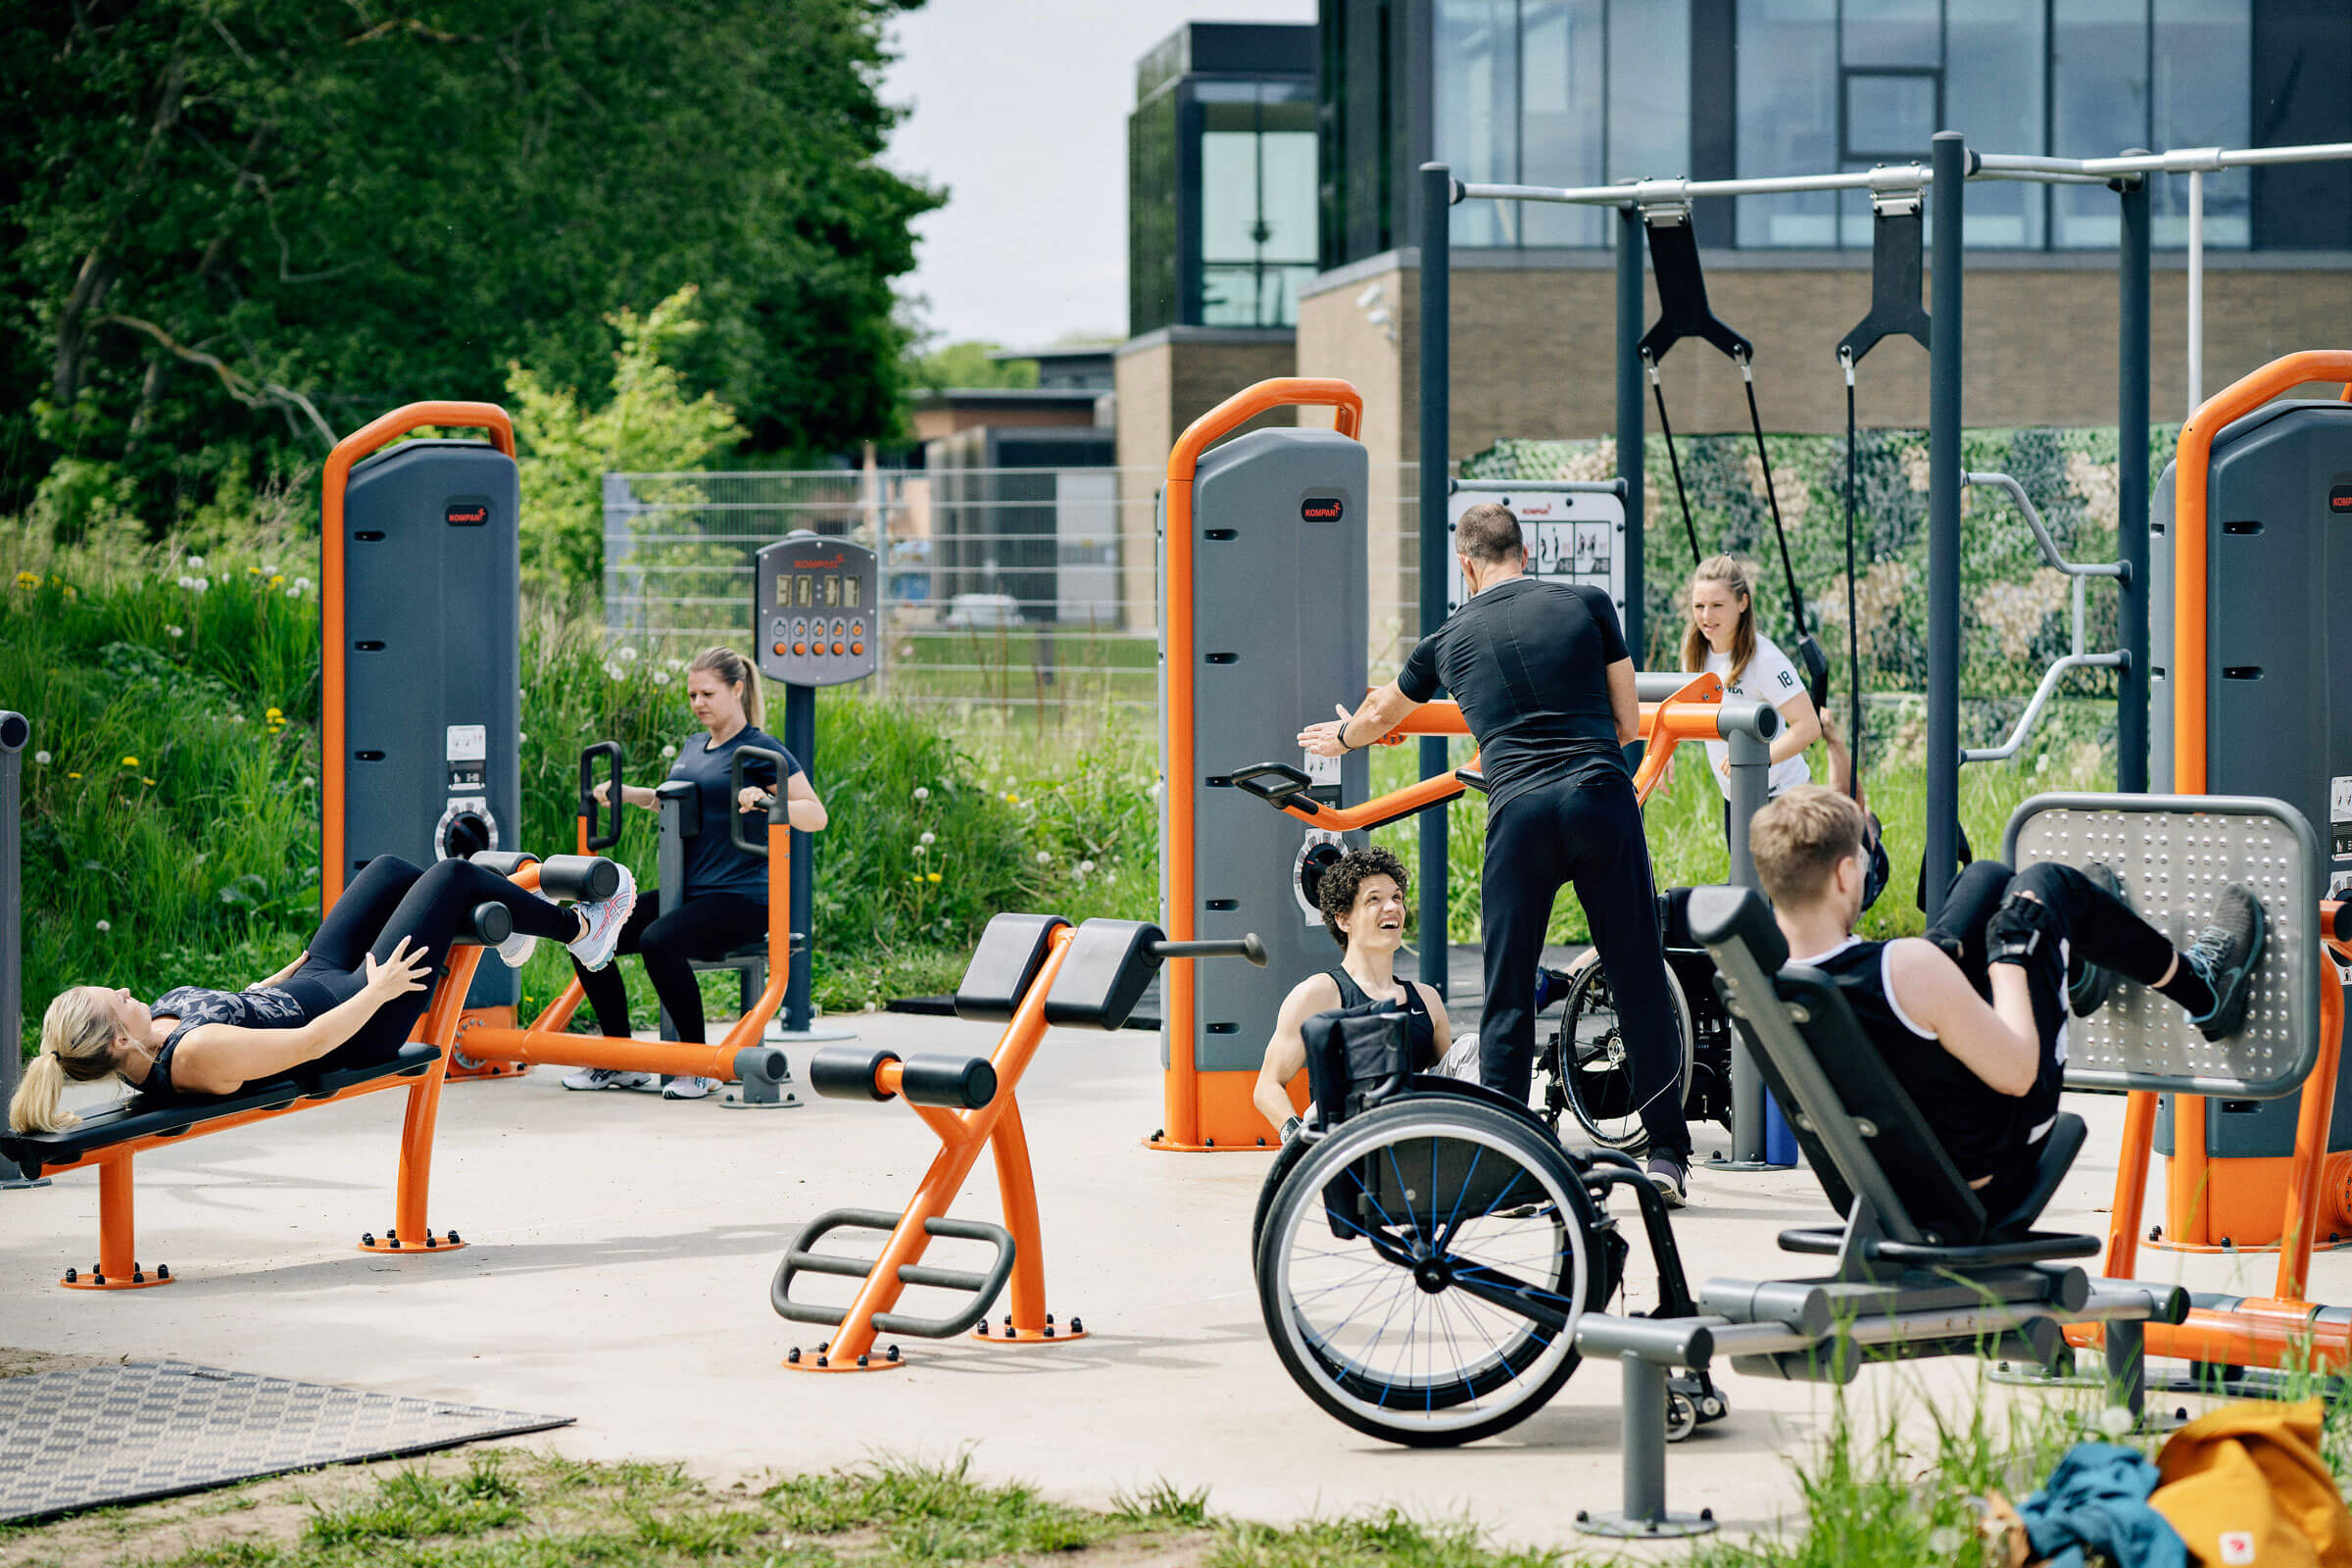 Outdoor fitness parks